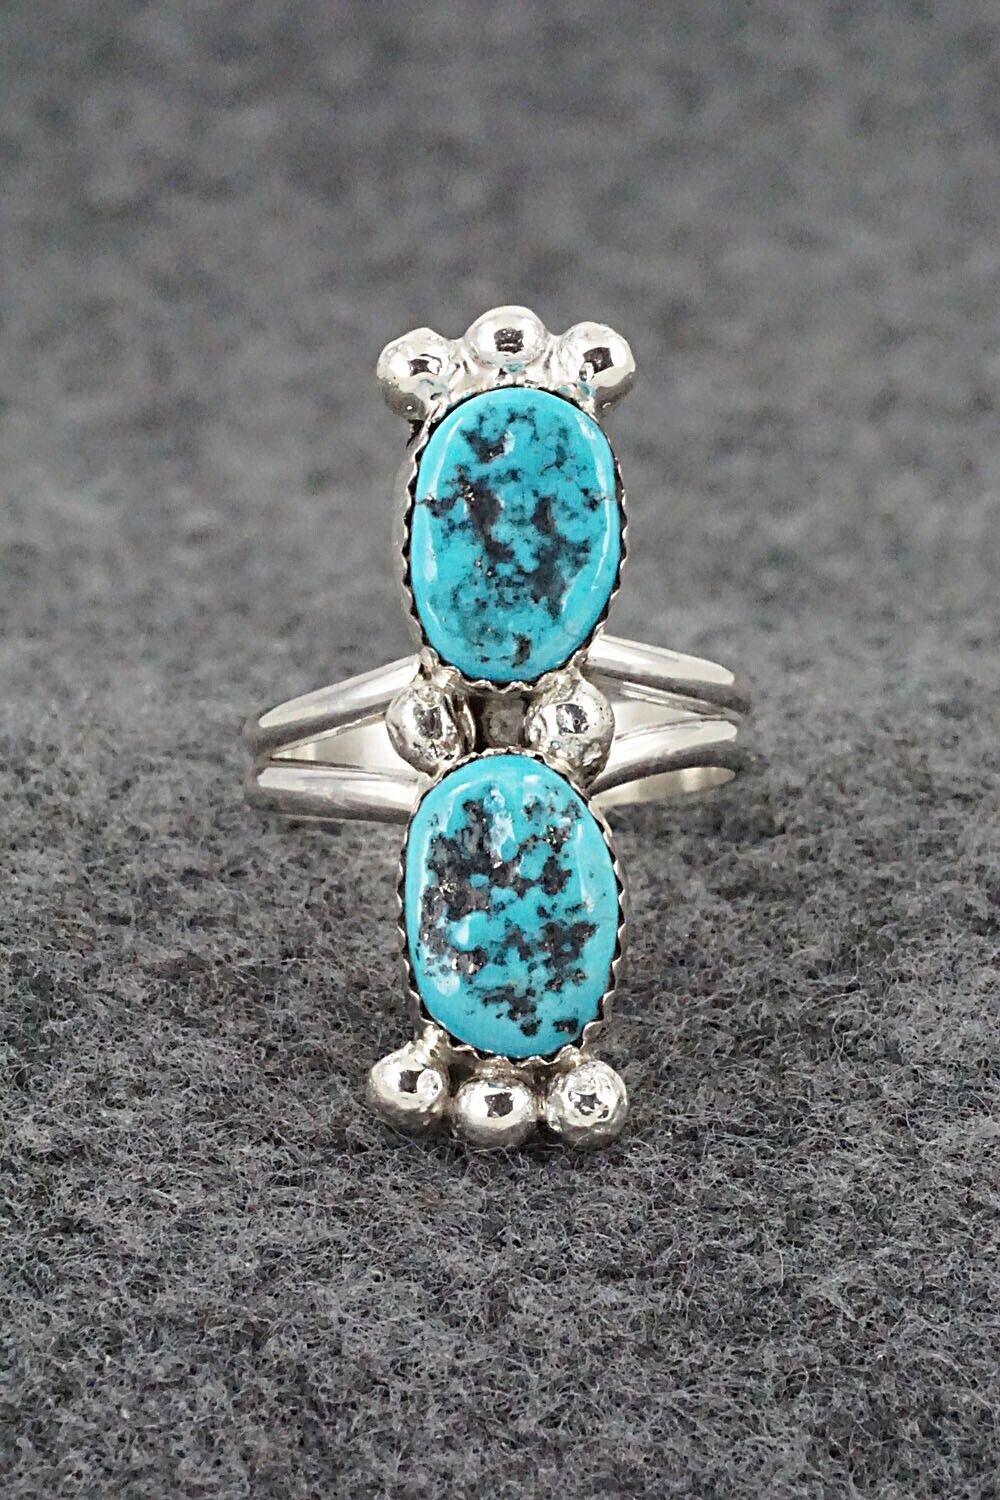 Turquoise & Sterling Silver Ring - Jeff Lucio - Size 8